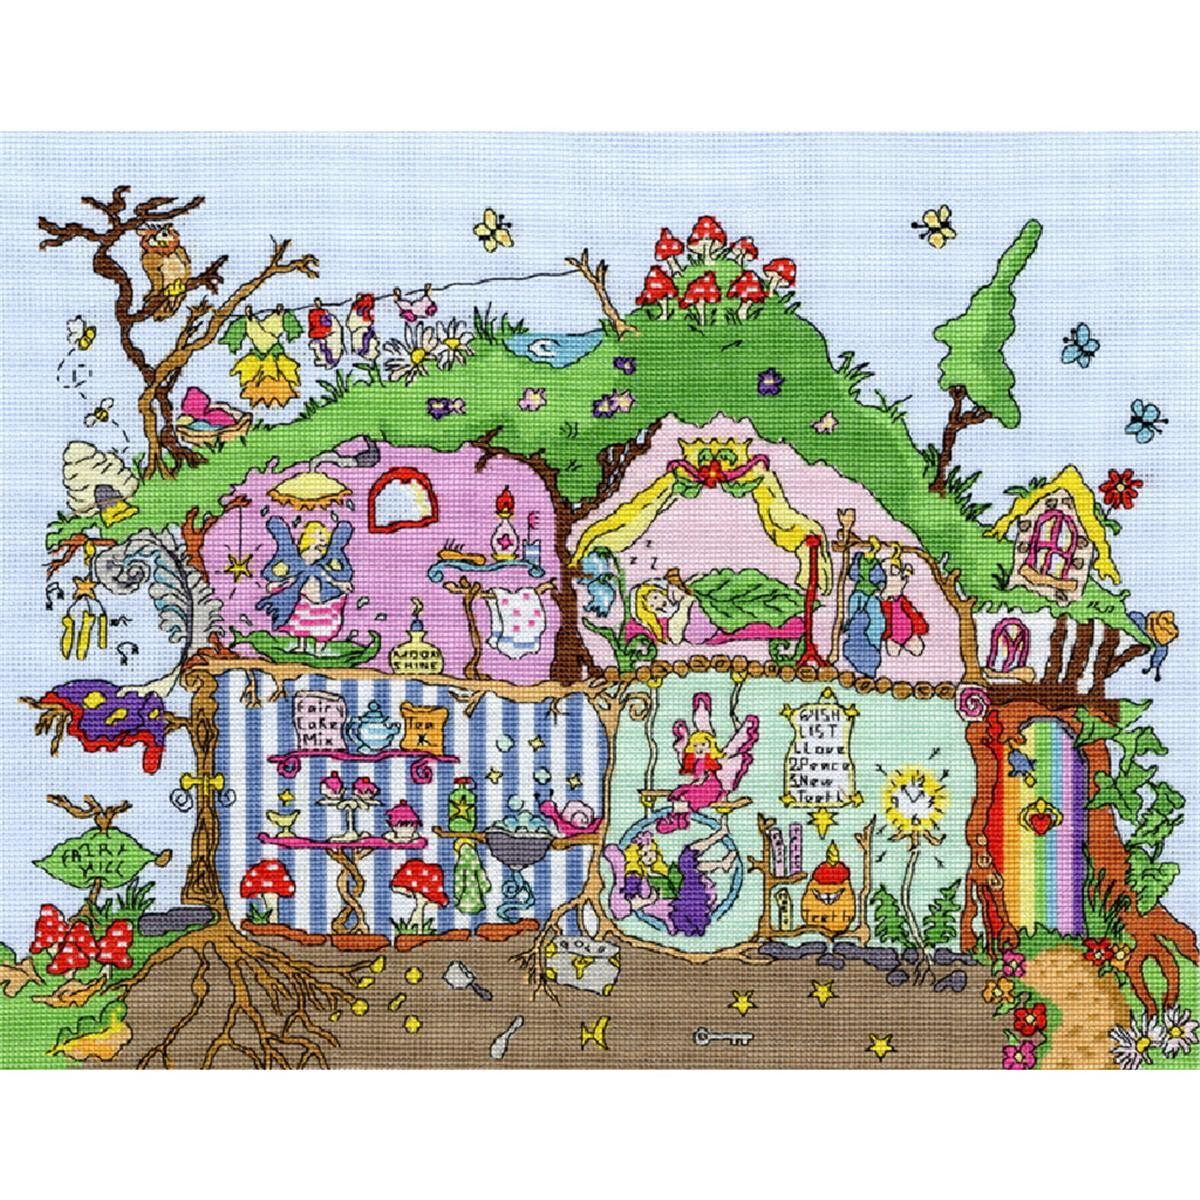 An intricate, colorful embroidery kit from Bothy Threads...